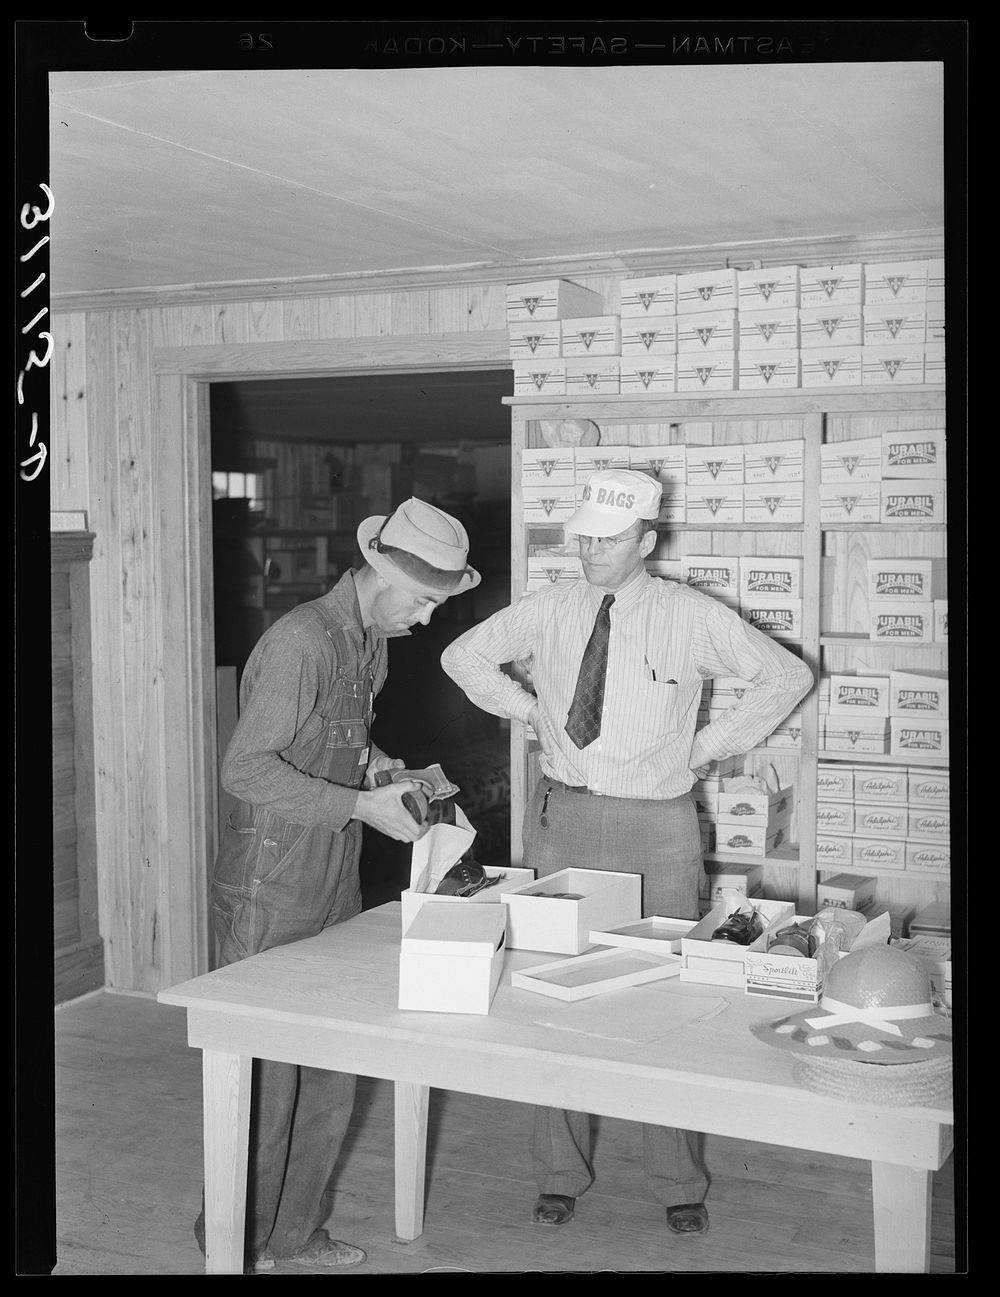 Southeast Missouri Farms. Buying pair of shoes at cooperative store. La Forge project, Missouri by Russell Lee